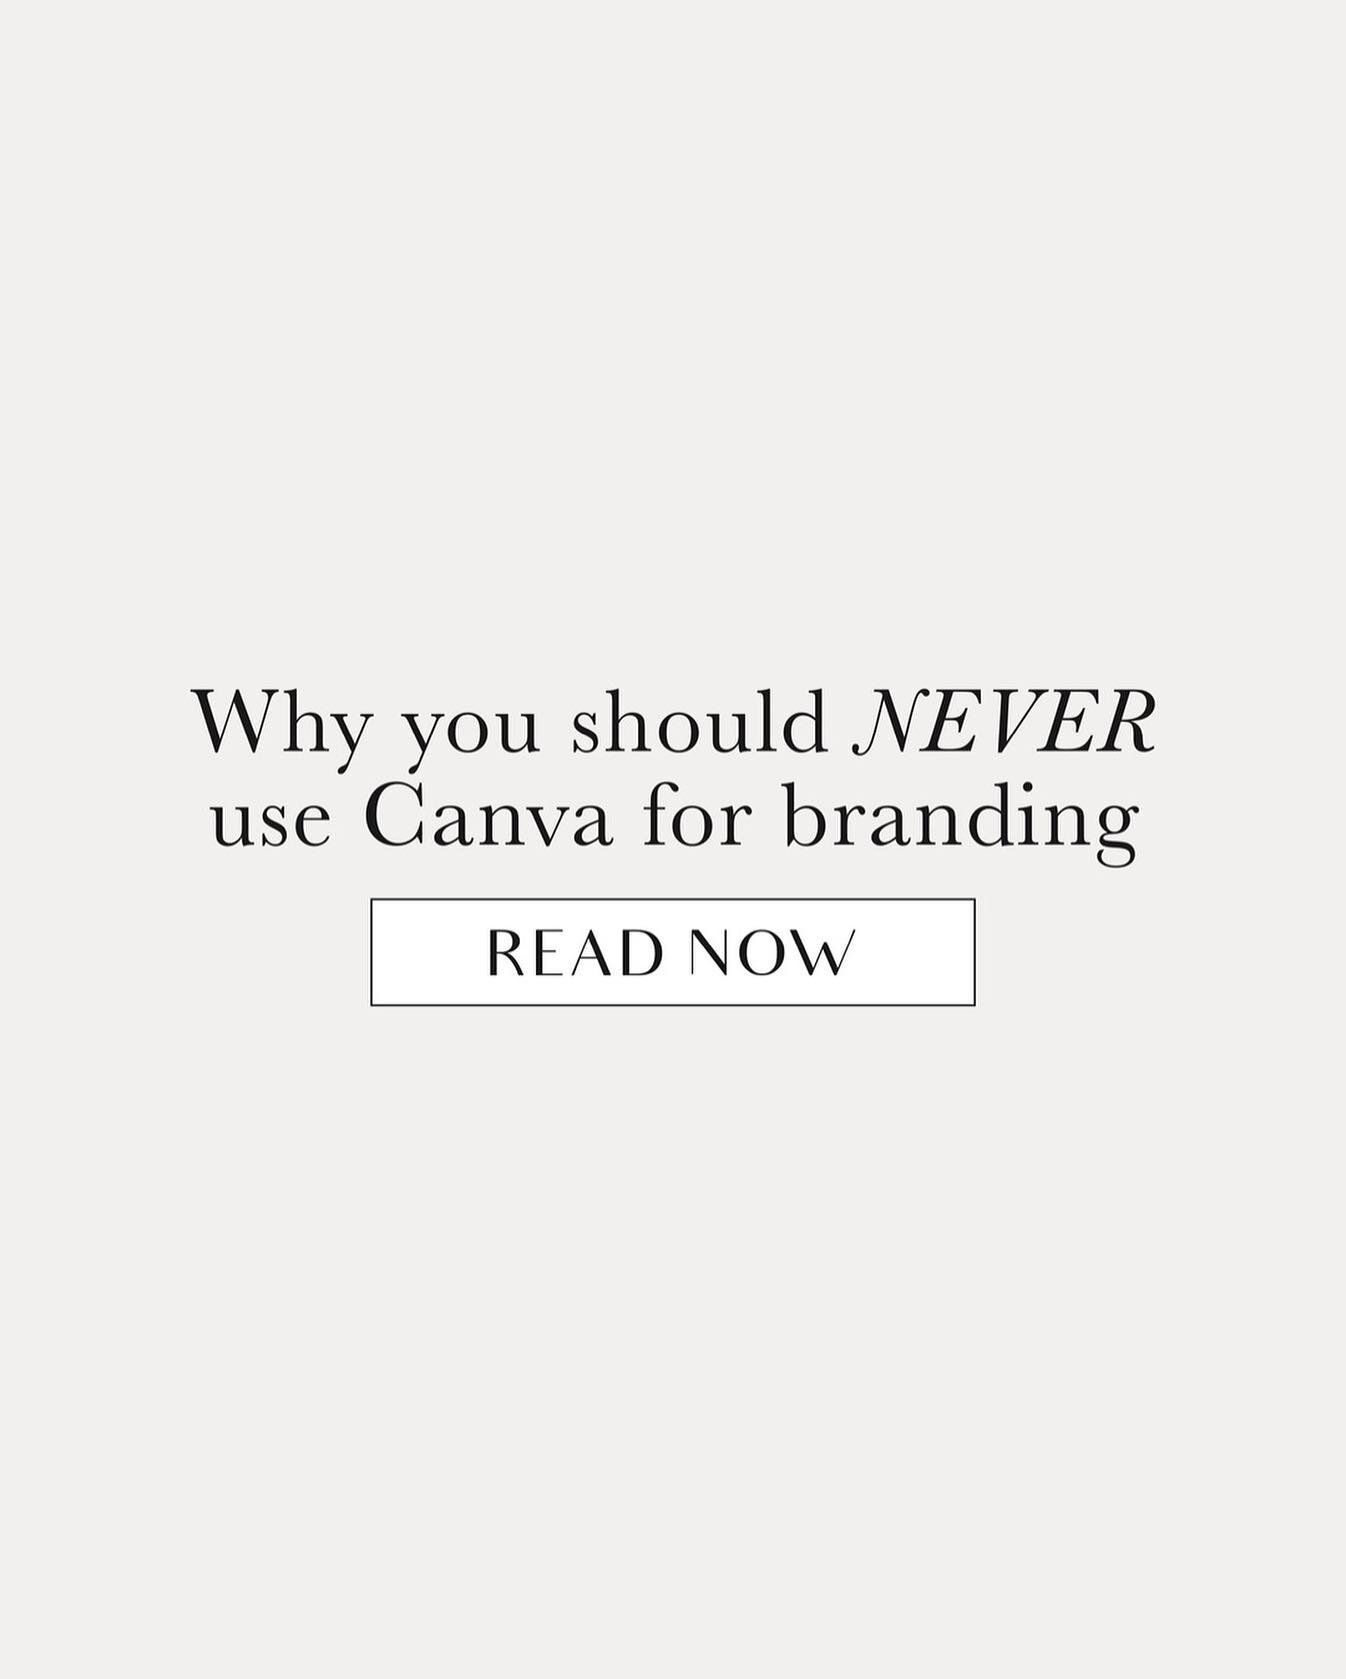 Why you should NEVER use Canva for branding.
⠀⠀⠀⠀⠀⠀⠀⠀⠀
Canva is an amazing design tool to create graphics + marketing collateral, but it just doesn&rsquo;t it cut it when it comes to creating your brand.
⠀⠀⠀⠀⠀⠀⠀⠀⠀
Here&rsquo;s why 👇
⠀⠀⠀⠀⠀⠀⠀⠀⠀
1️⃣ Ca